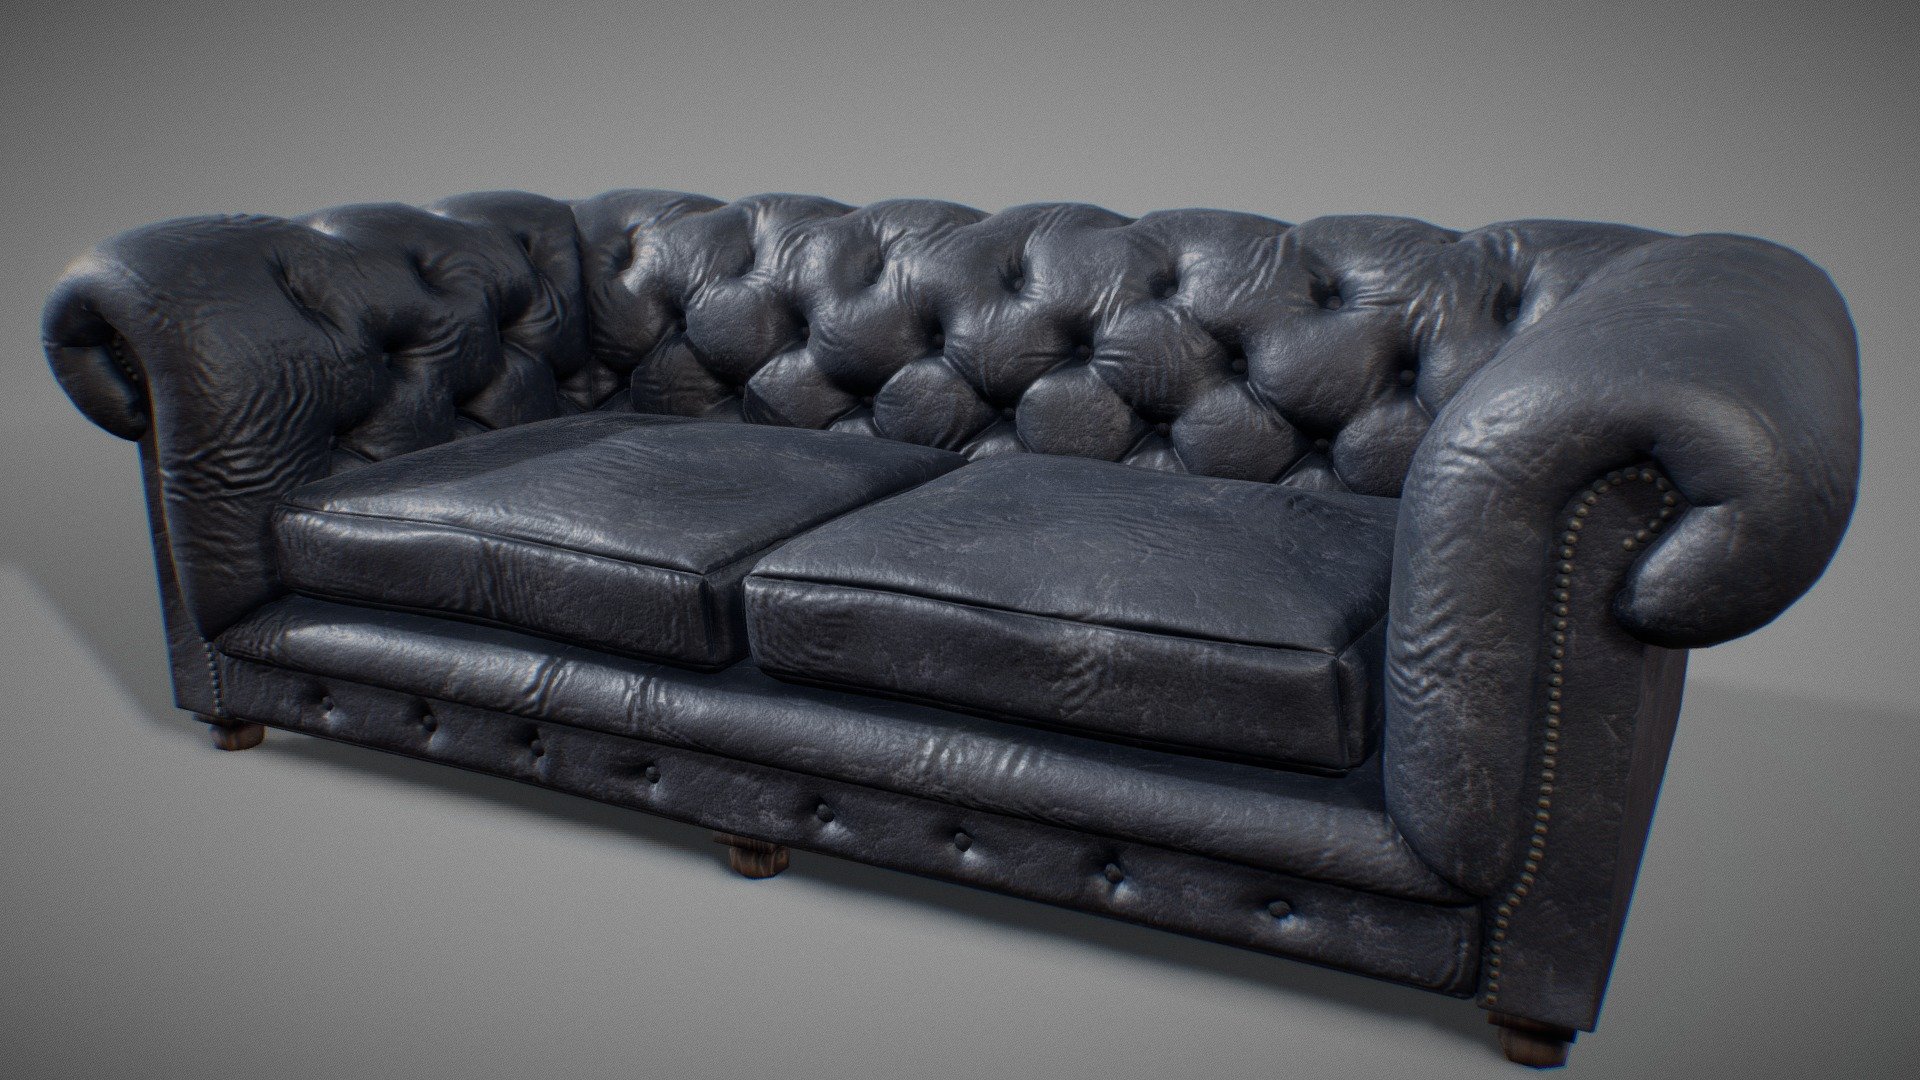 professionally modeled realistic chesterfield leather sofa. it has a PBR material with 8K textures, including: diffuse, roughness, normal, metallic. the classic chesterfield look was achieved by simulating the mesh with a cloth brush. real life reference was used to make it look as realistic as possible. it is also low poly and game ready 3d model